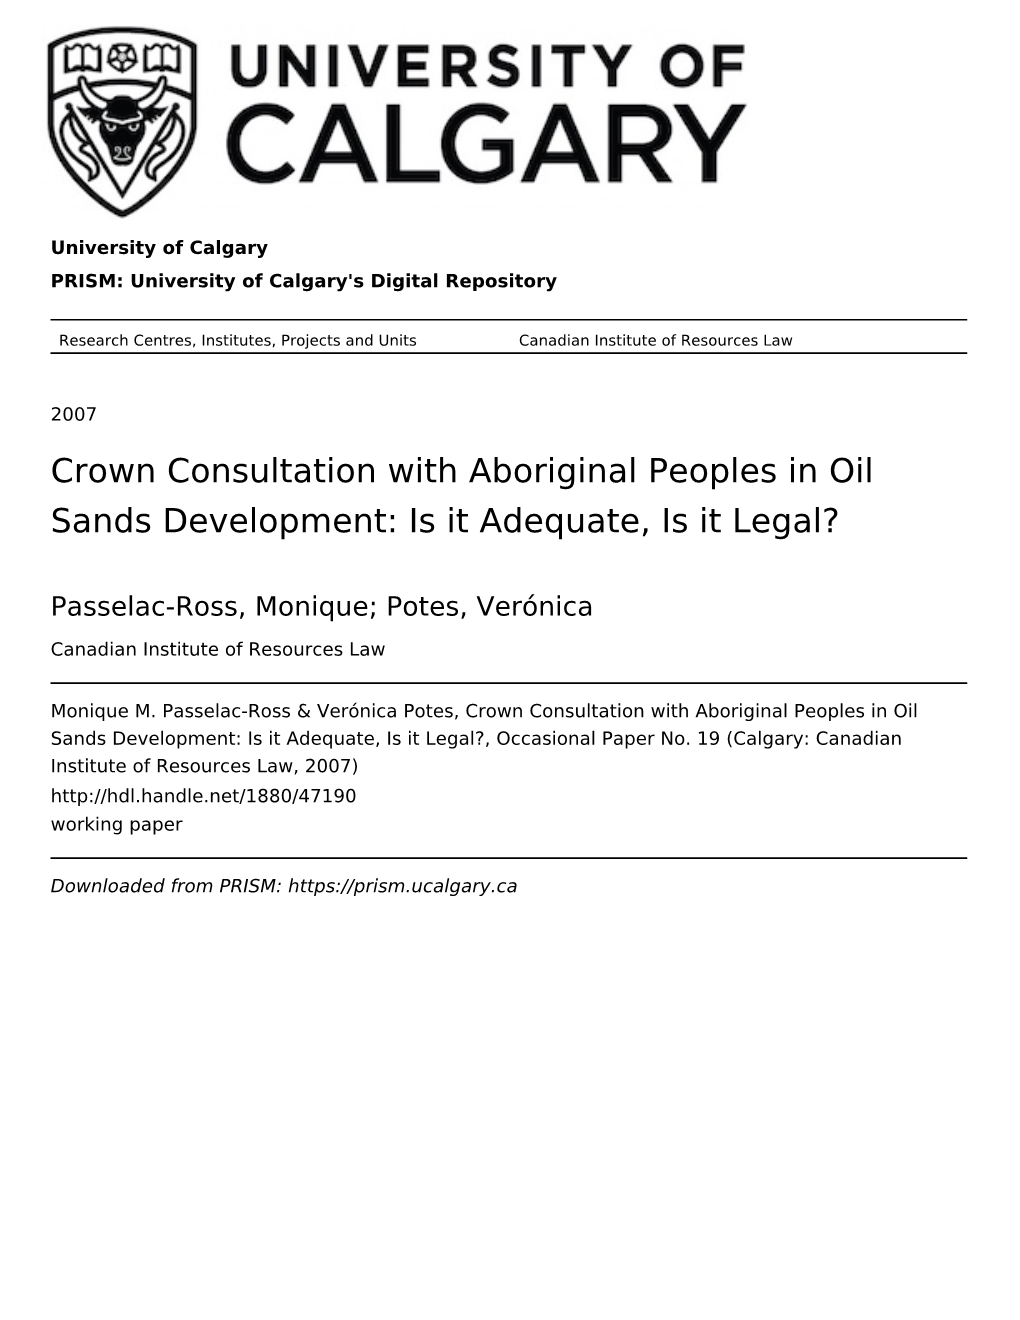 Crown Consultation with Aboriginal Peoples in Oil Sands Development: Is It Adequate, Is It Legal?